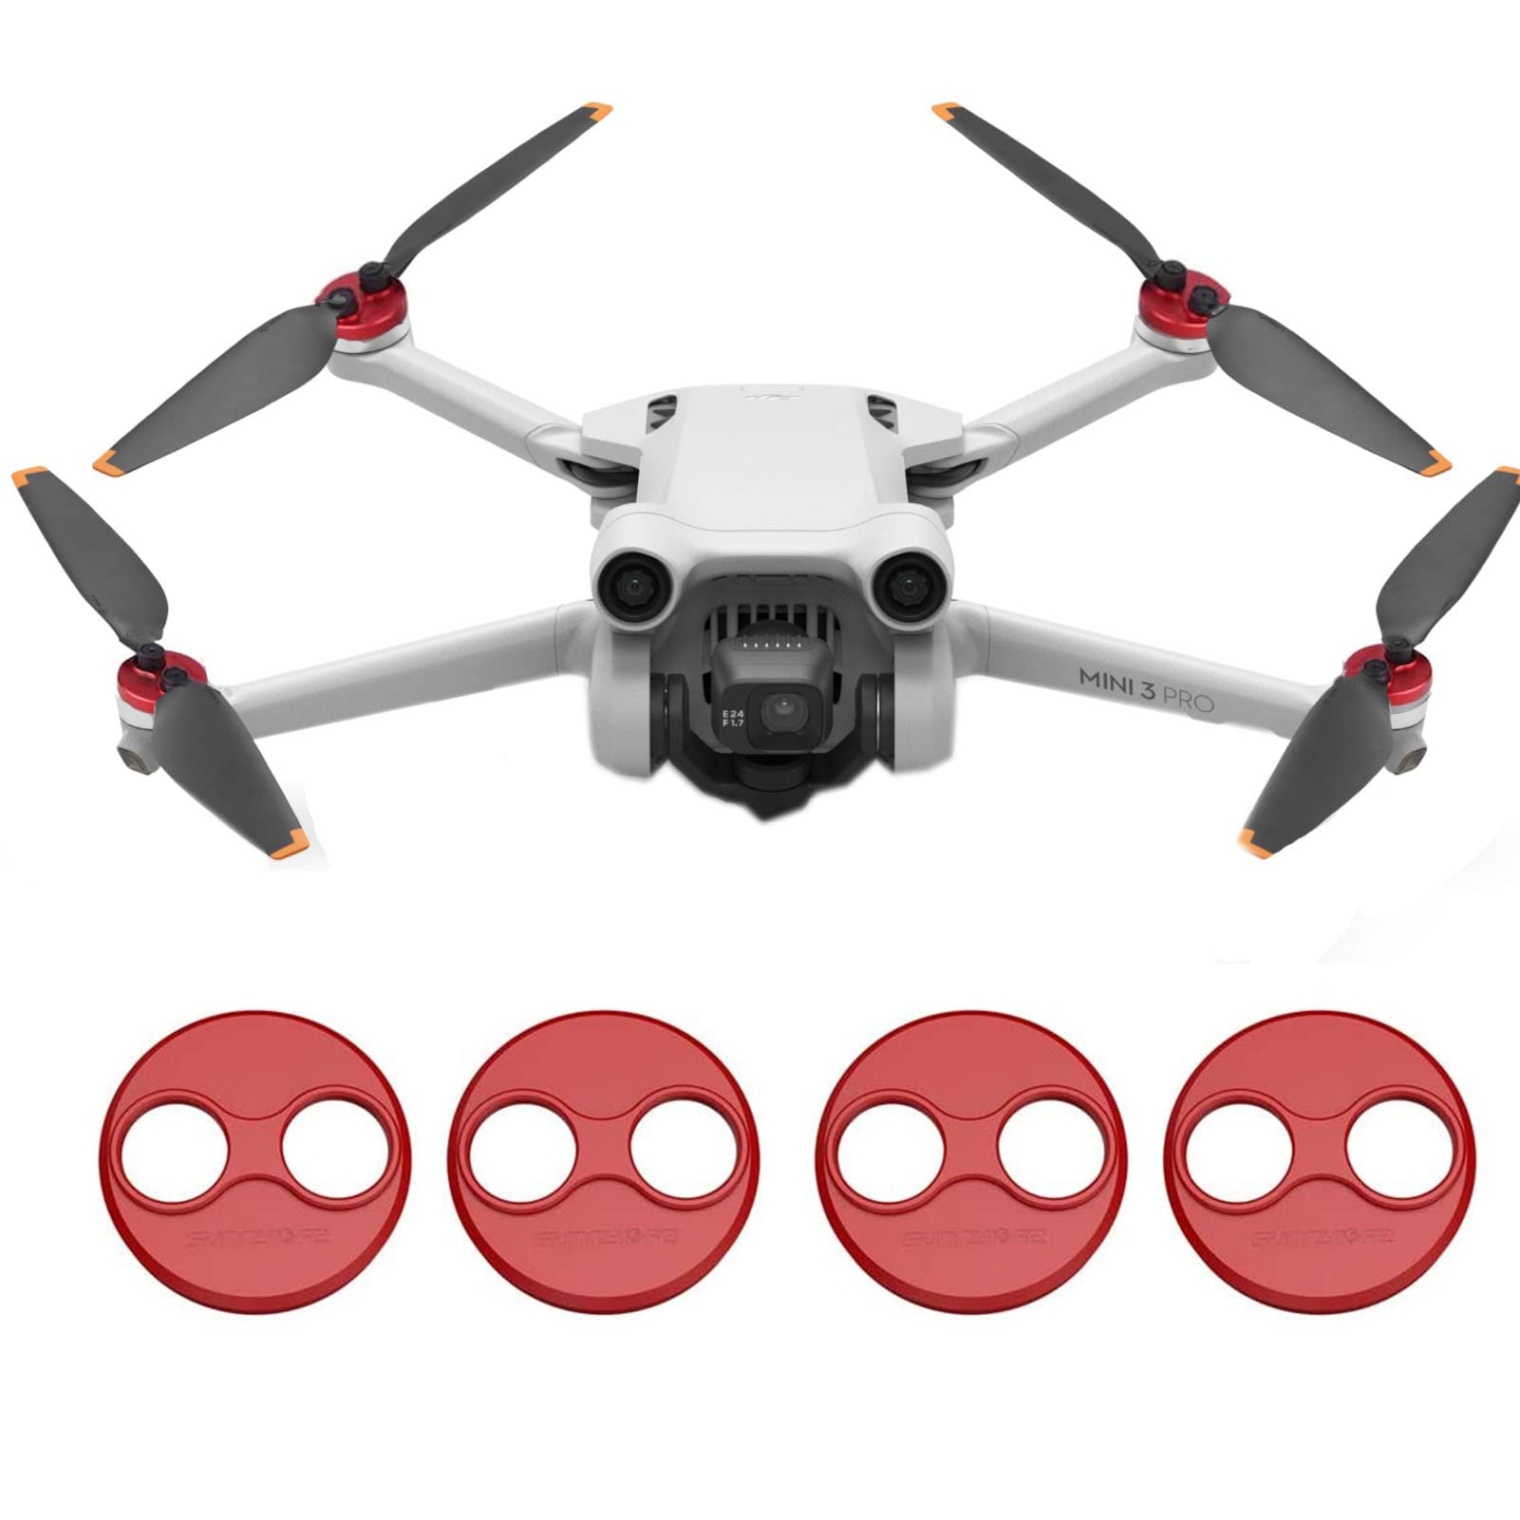 Upgrade Your DJI Mini 3 Experience With Must-Have Accessories!